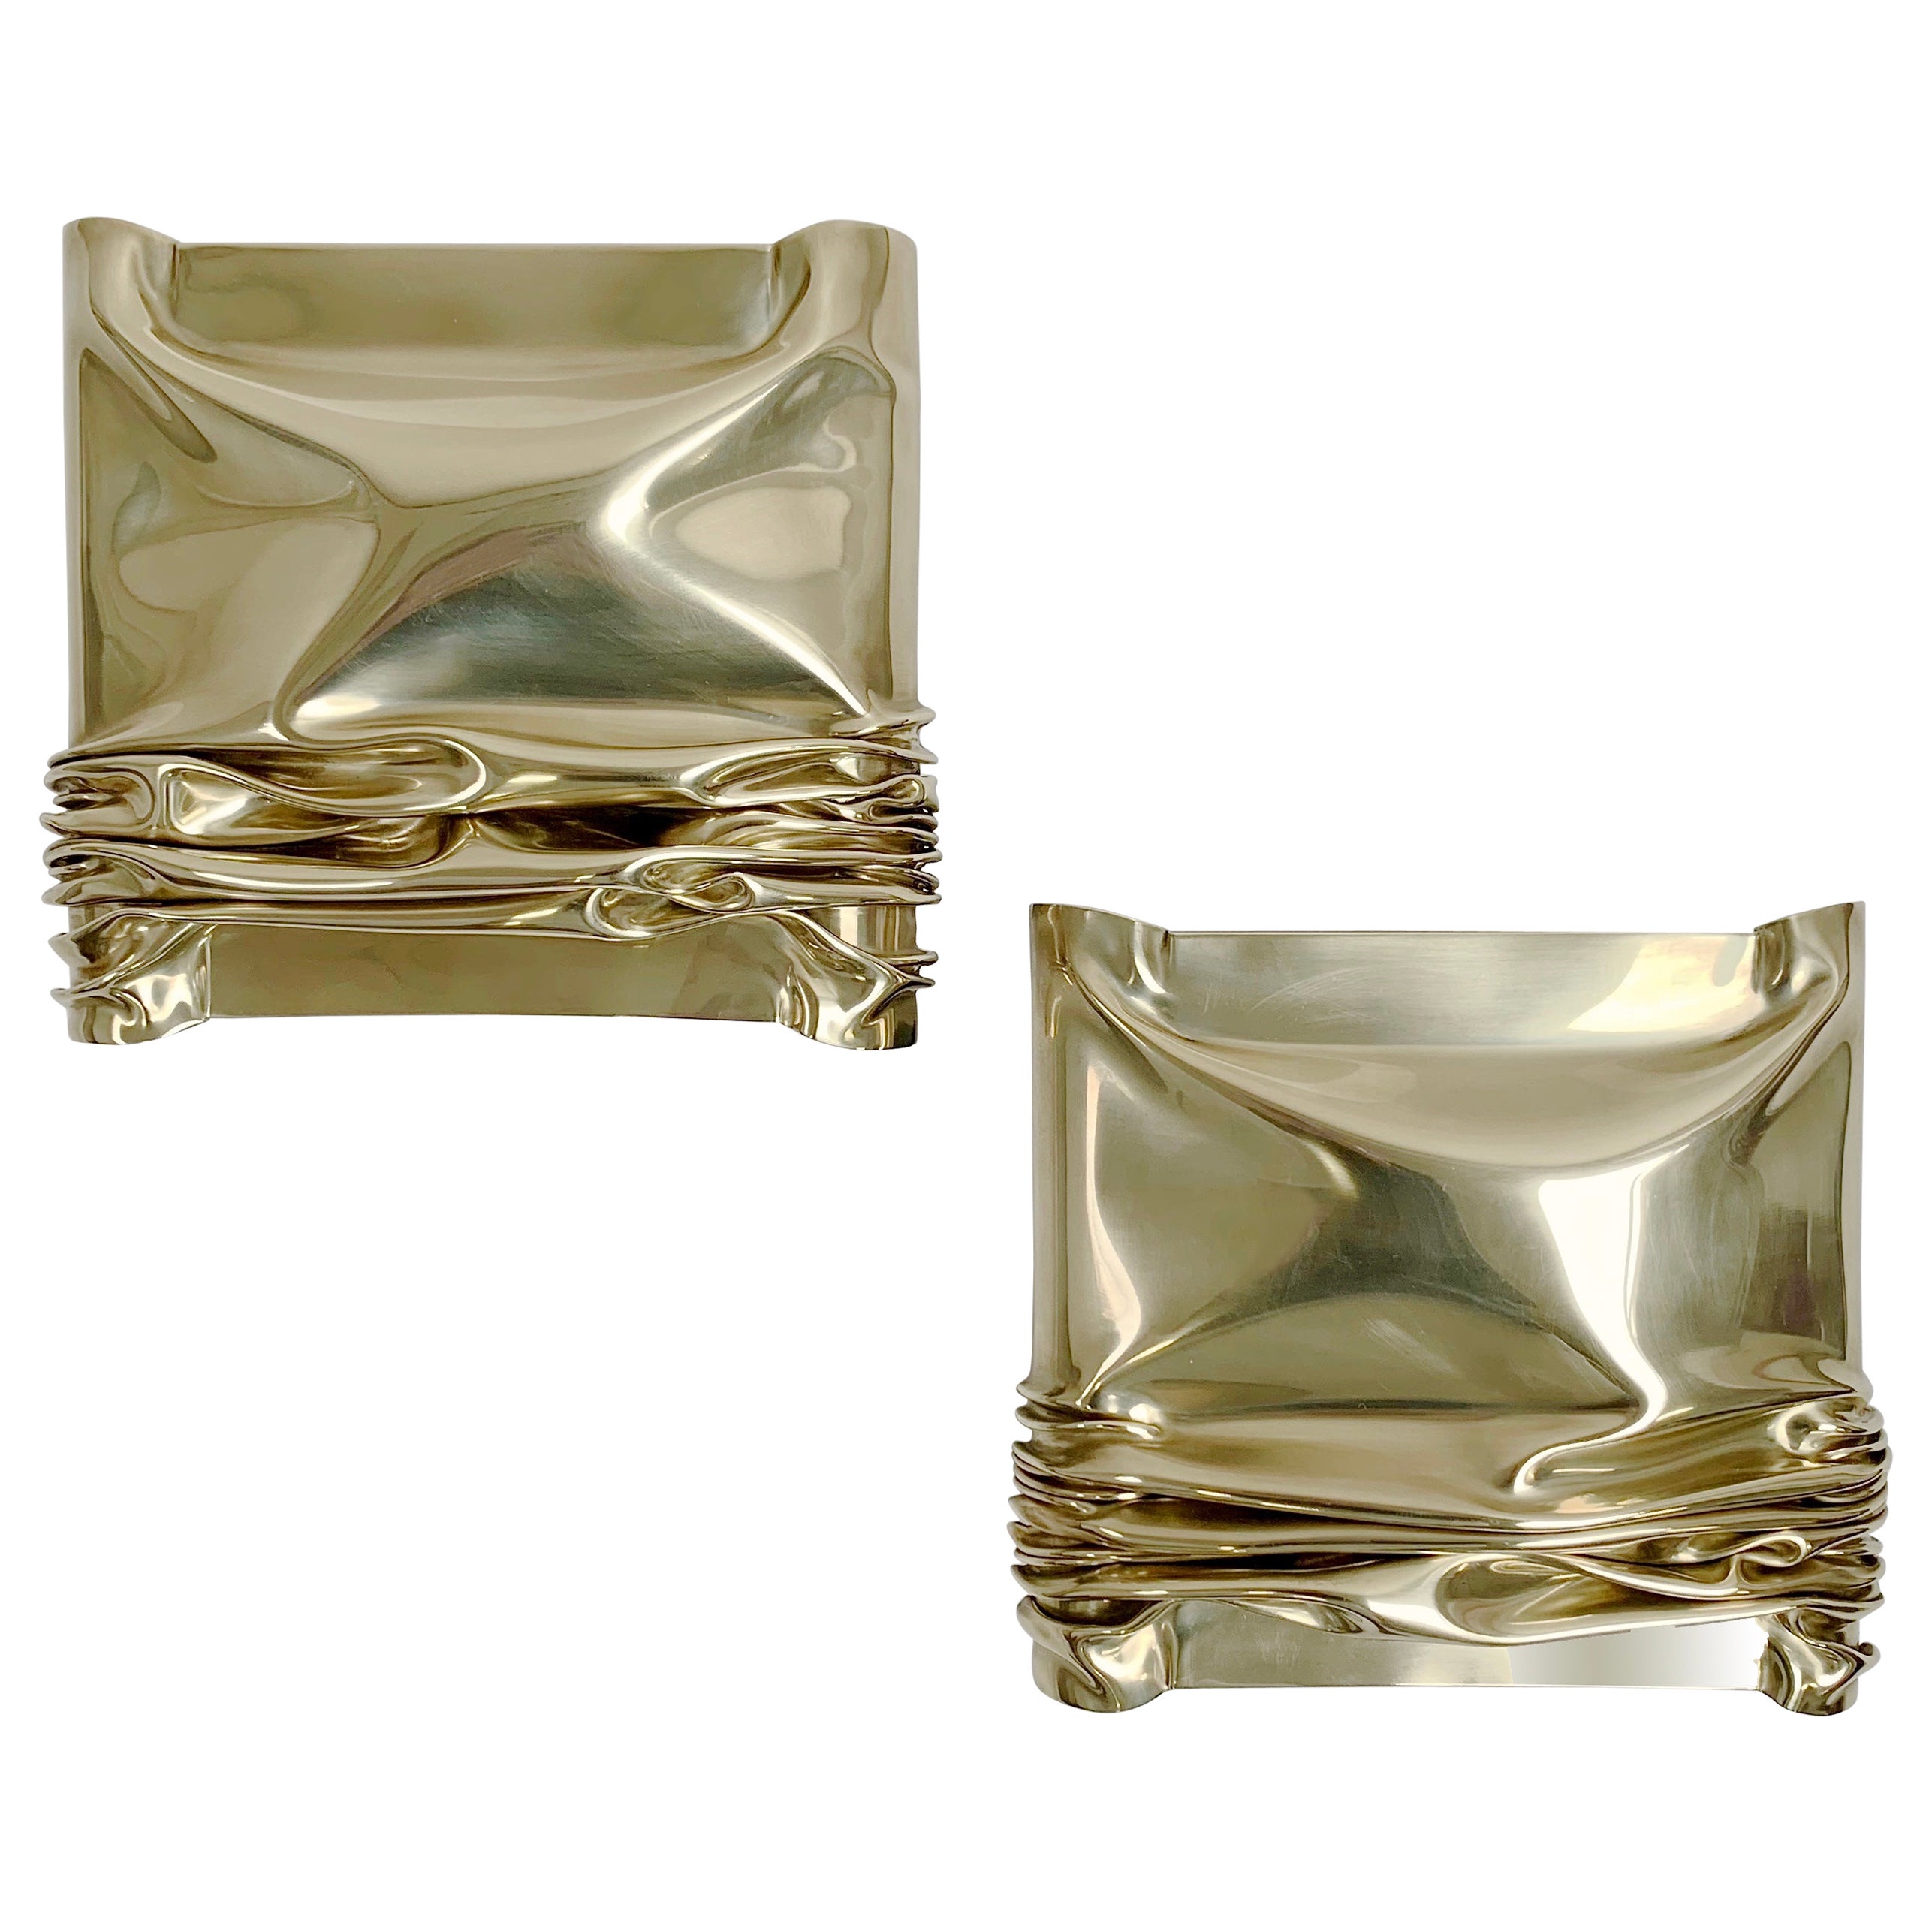 Nice Jacques Moniquet pair of brass wall sconces.
Model M8 edited in small edition by Chéret AAM Paris, circa 1975, France.
Compressed polished brass, black perspex, each piece produced by Moniquet is unique.
Original wall mounting plates included.